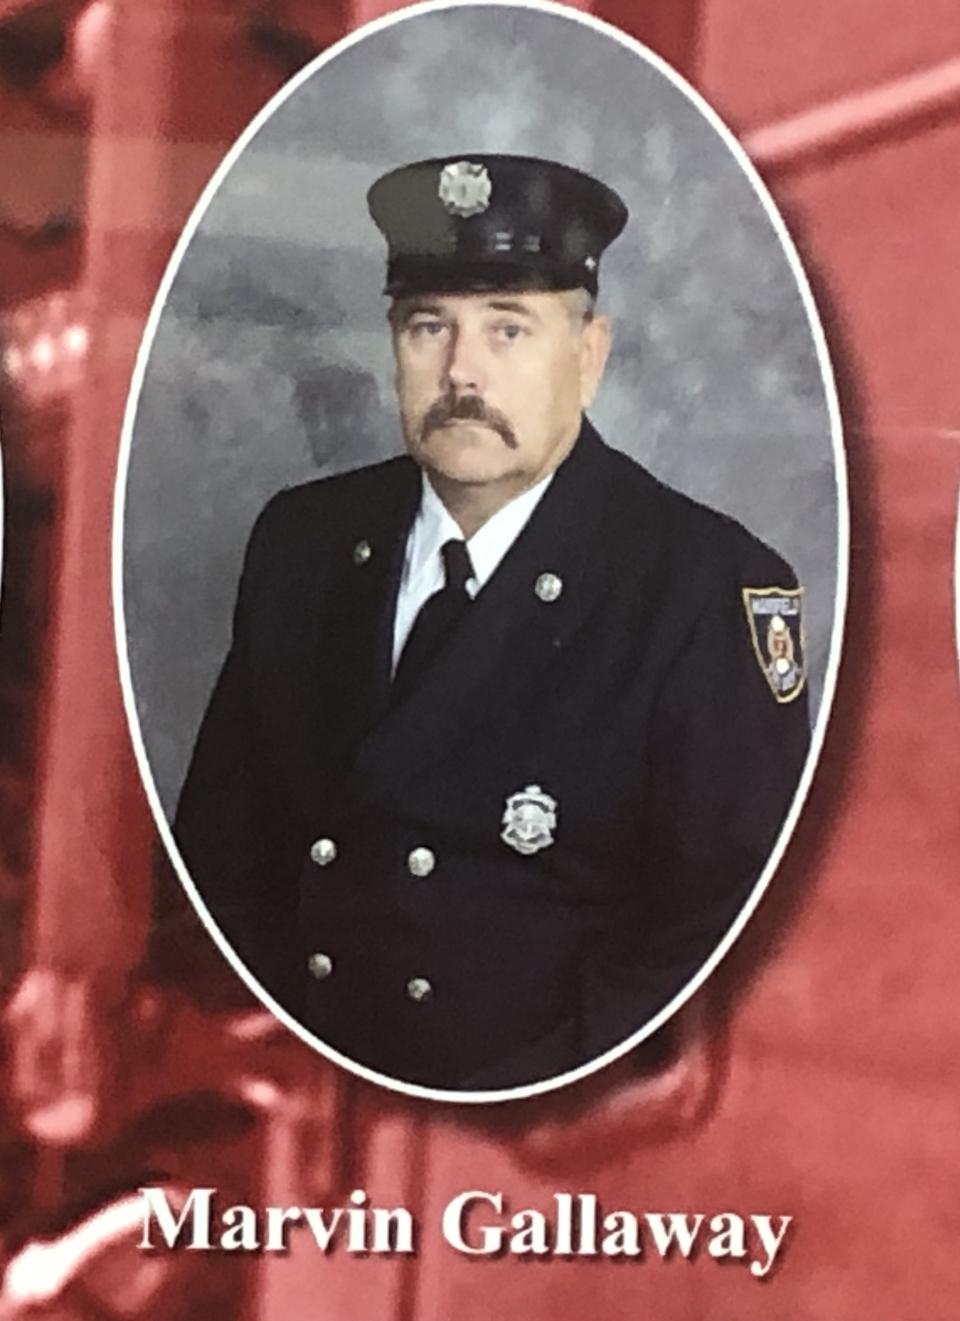 This photo of Marvin Gallaway is part of a display featuring the 2006 Mansfield Fire Department.